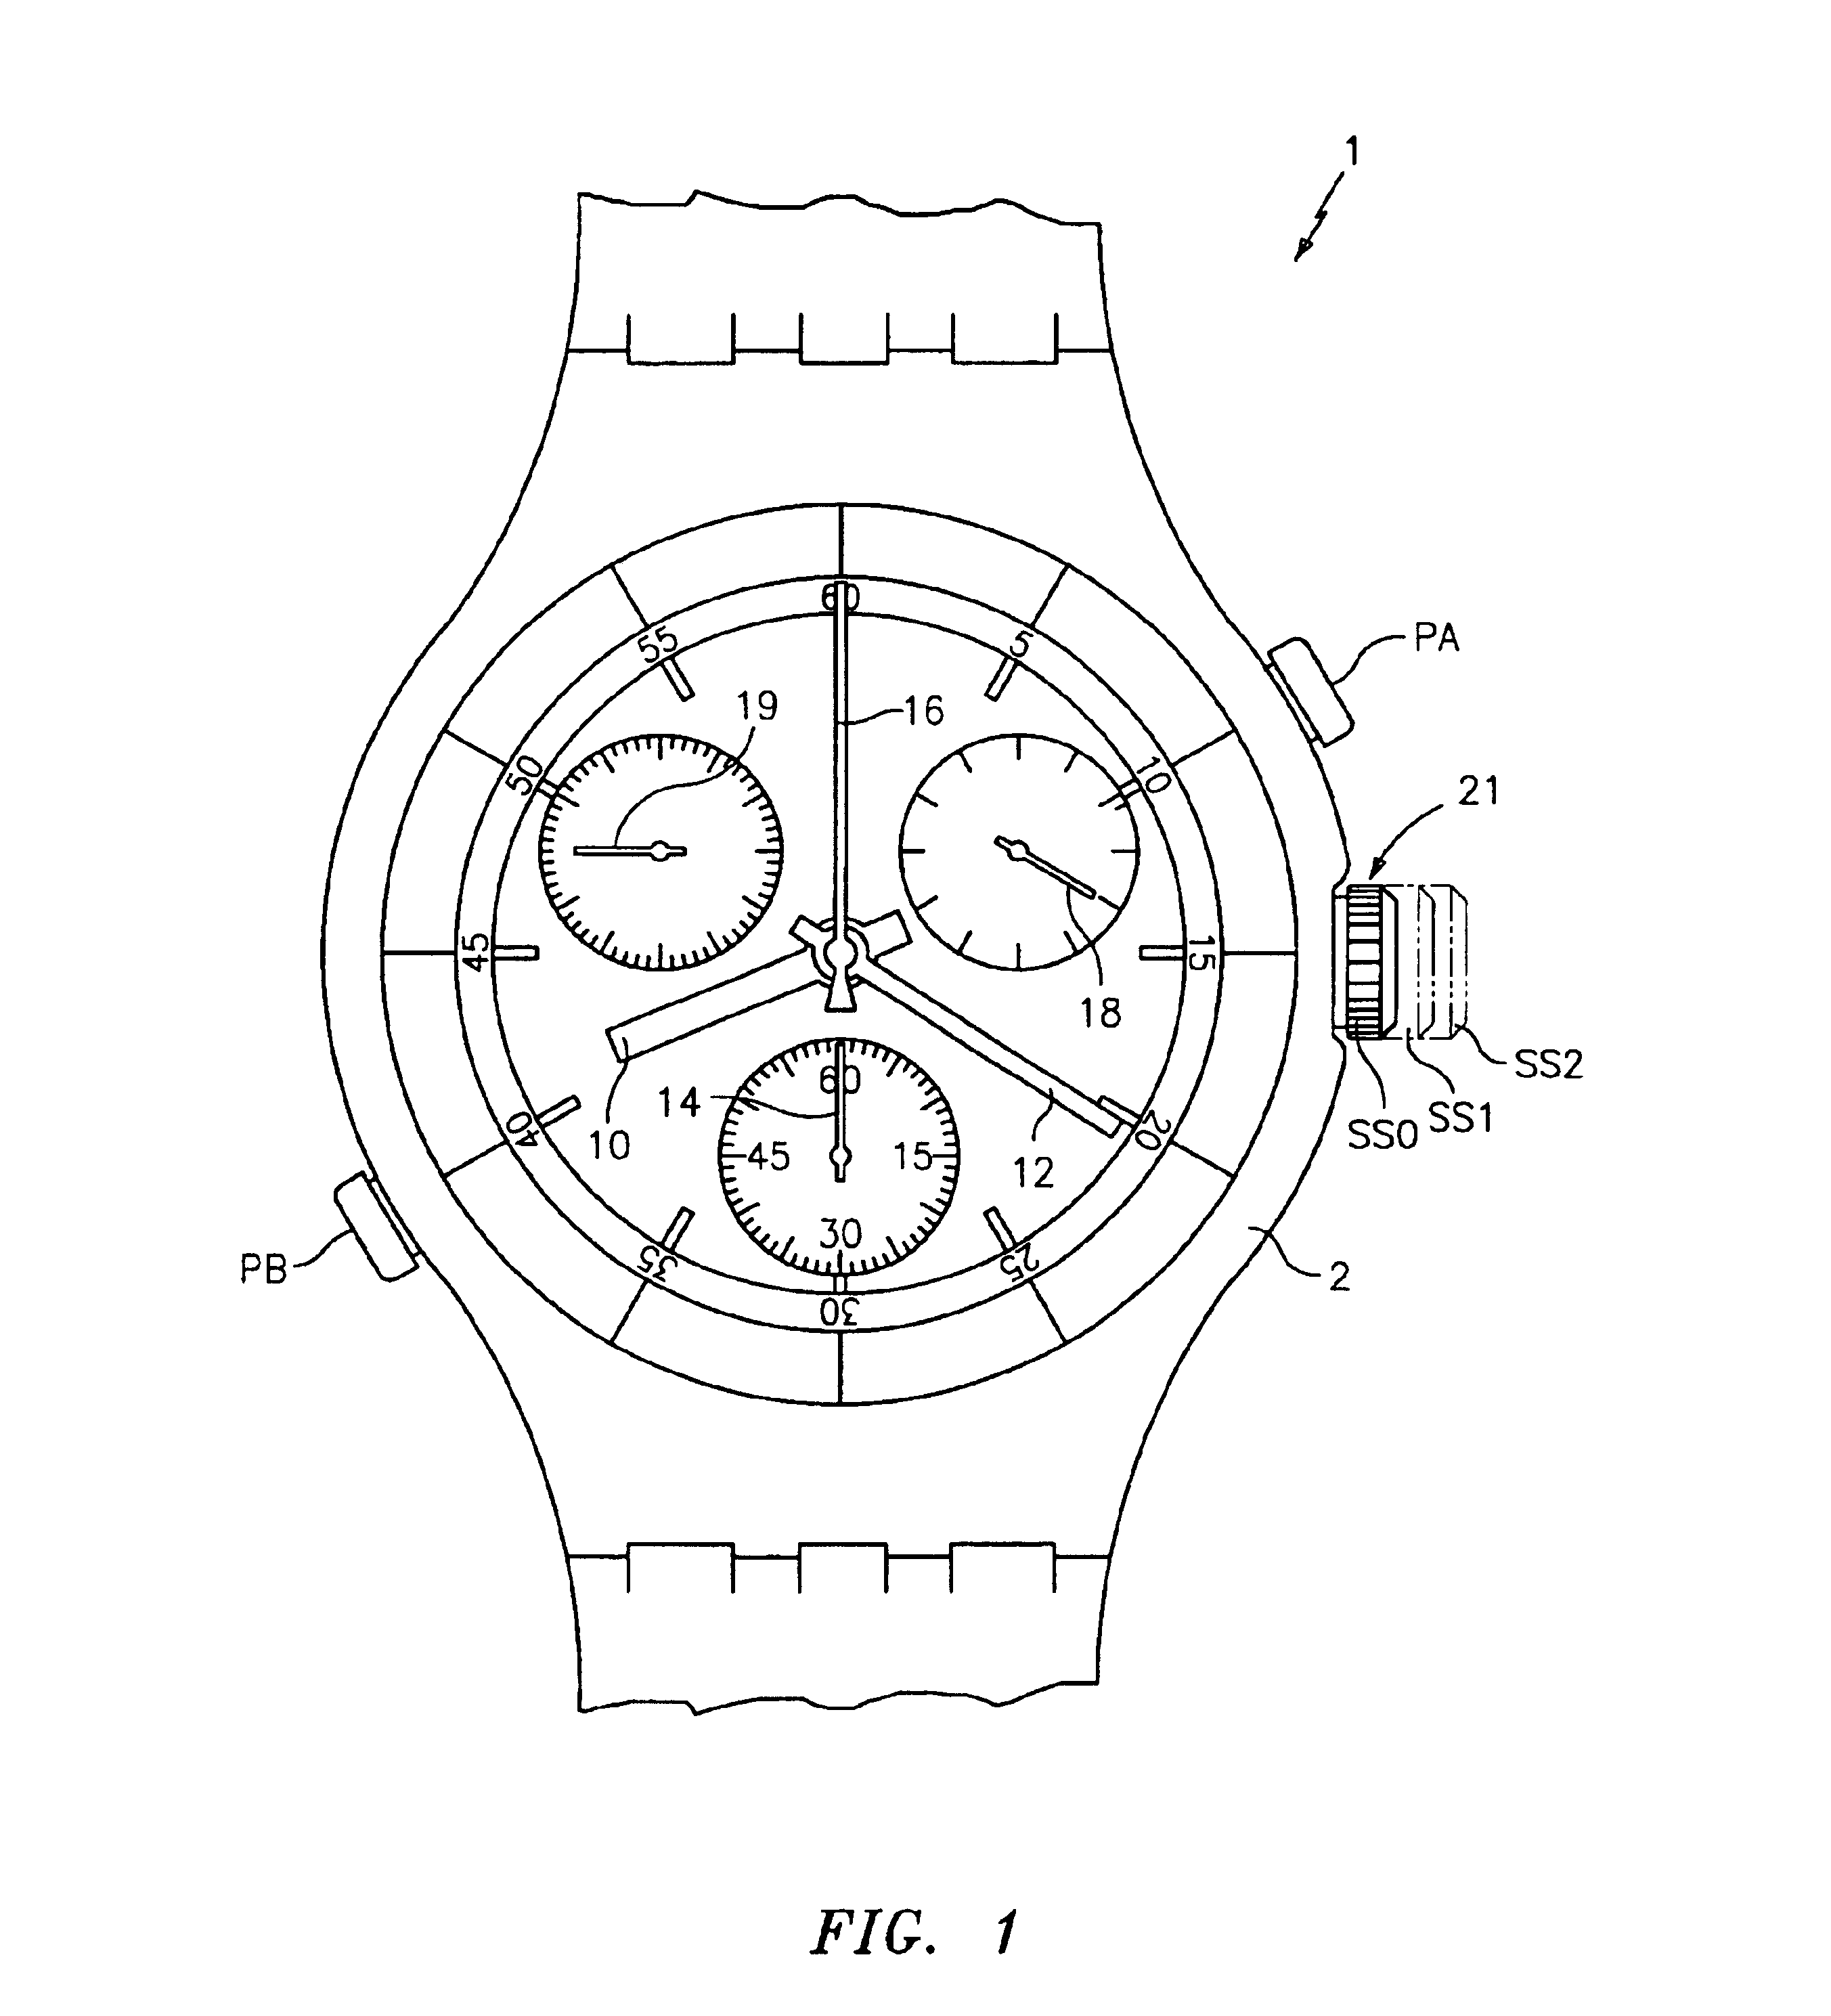 Mode selecting assembly for a timepiece